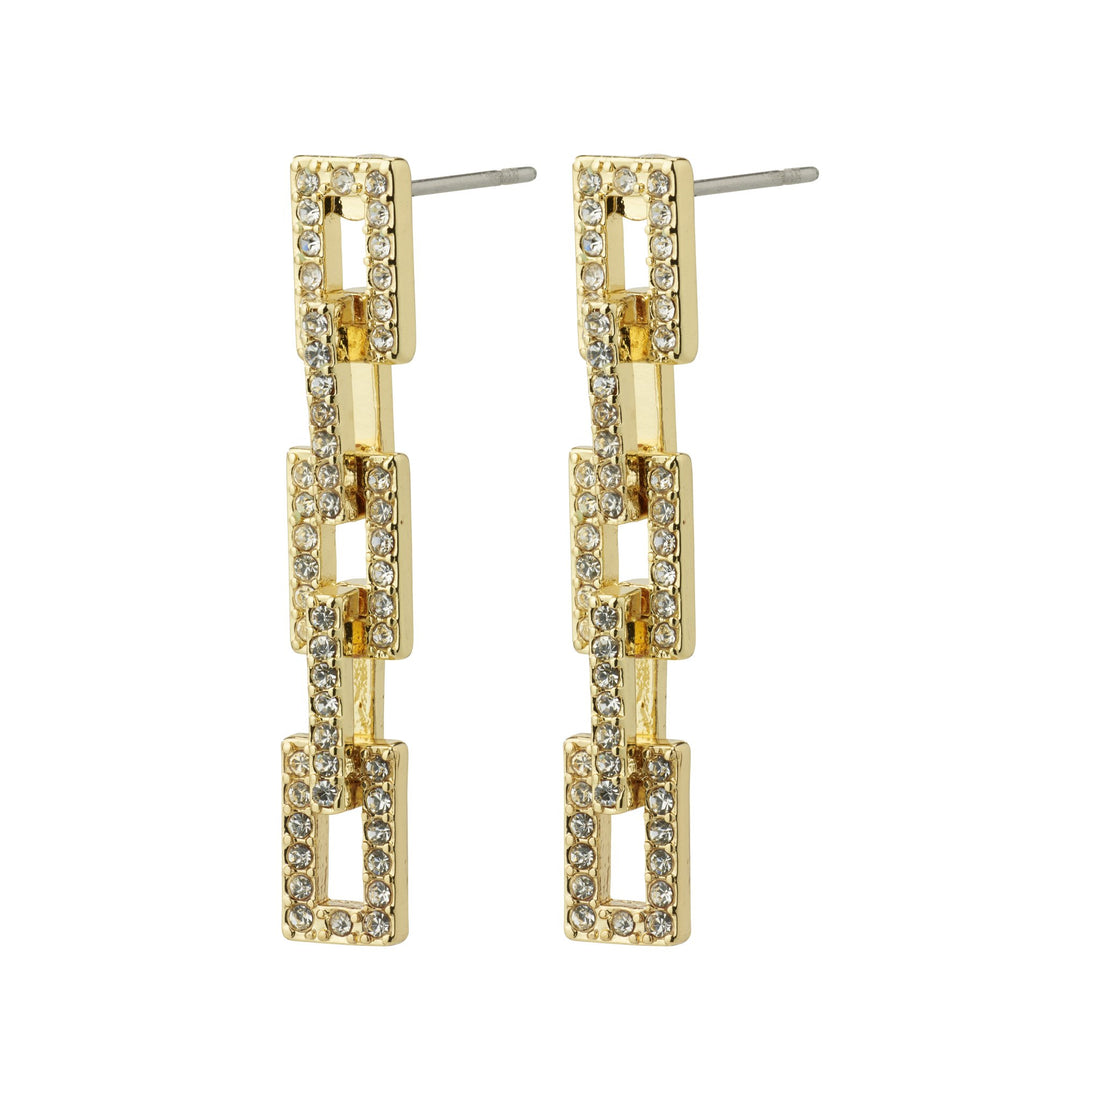 COBY Recycled Crystal Earrings